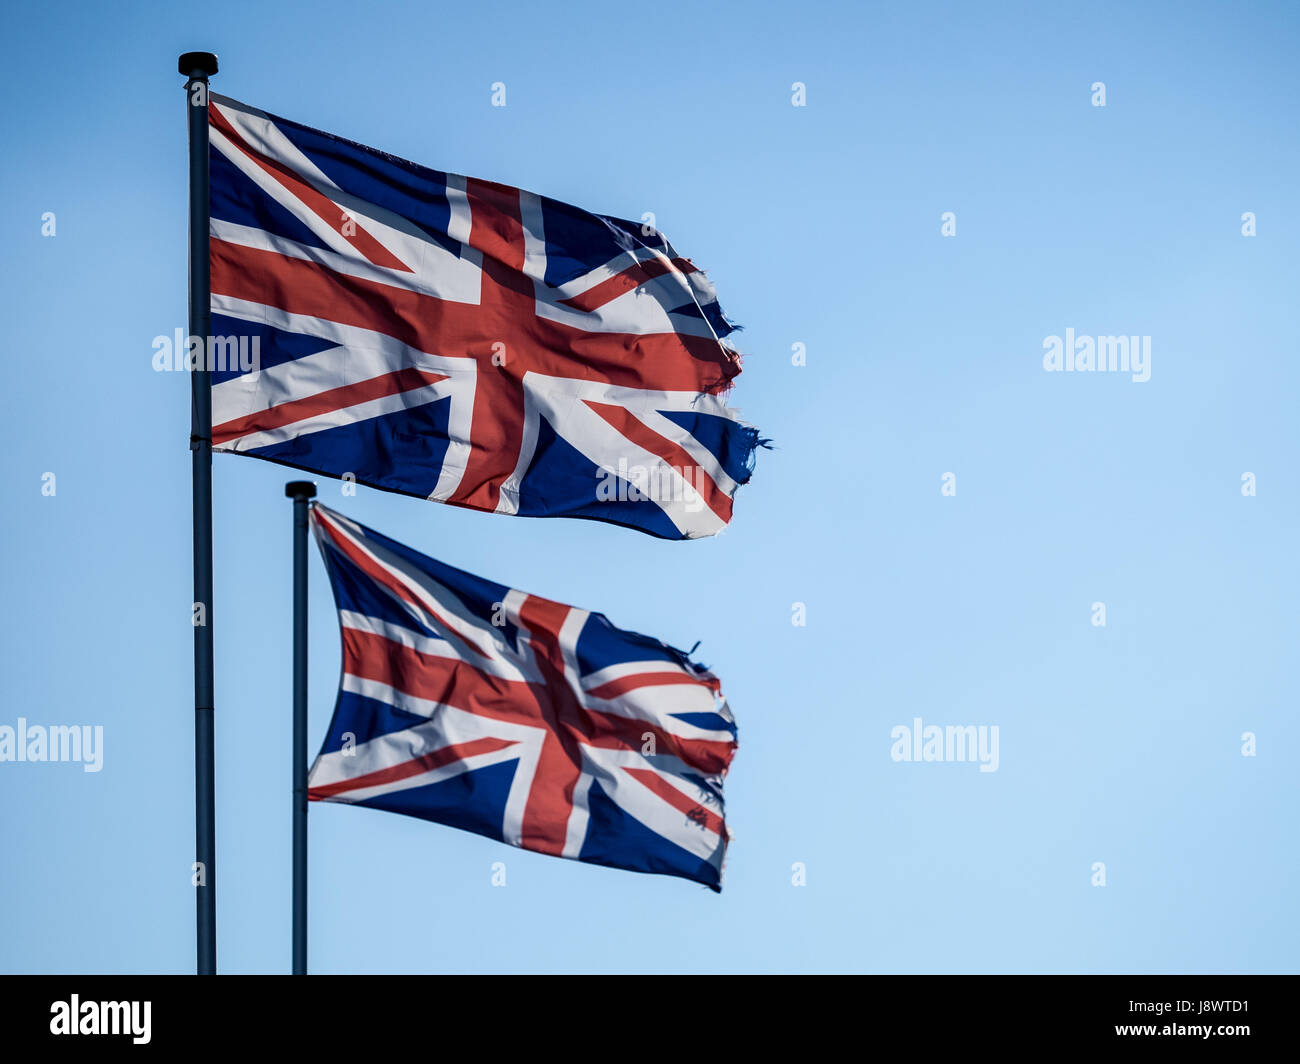 Two Union Jack flags, backlit against a blue sky Stock Photo